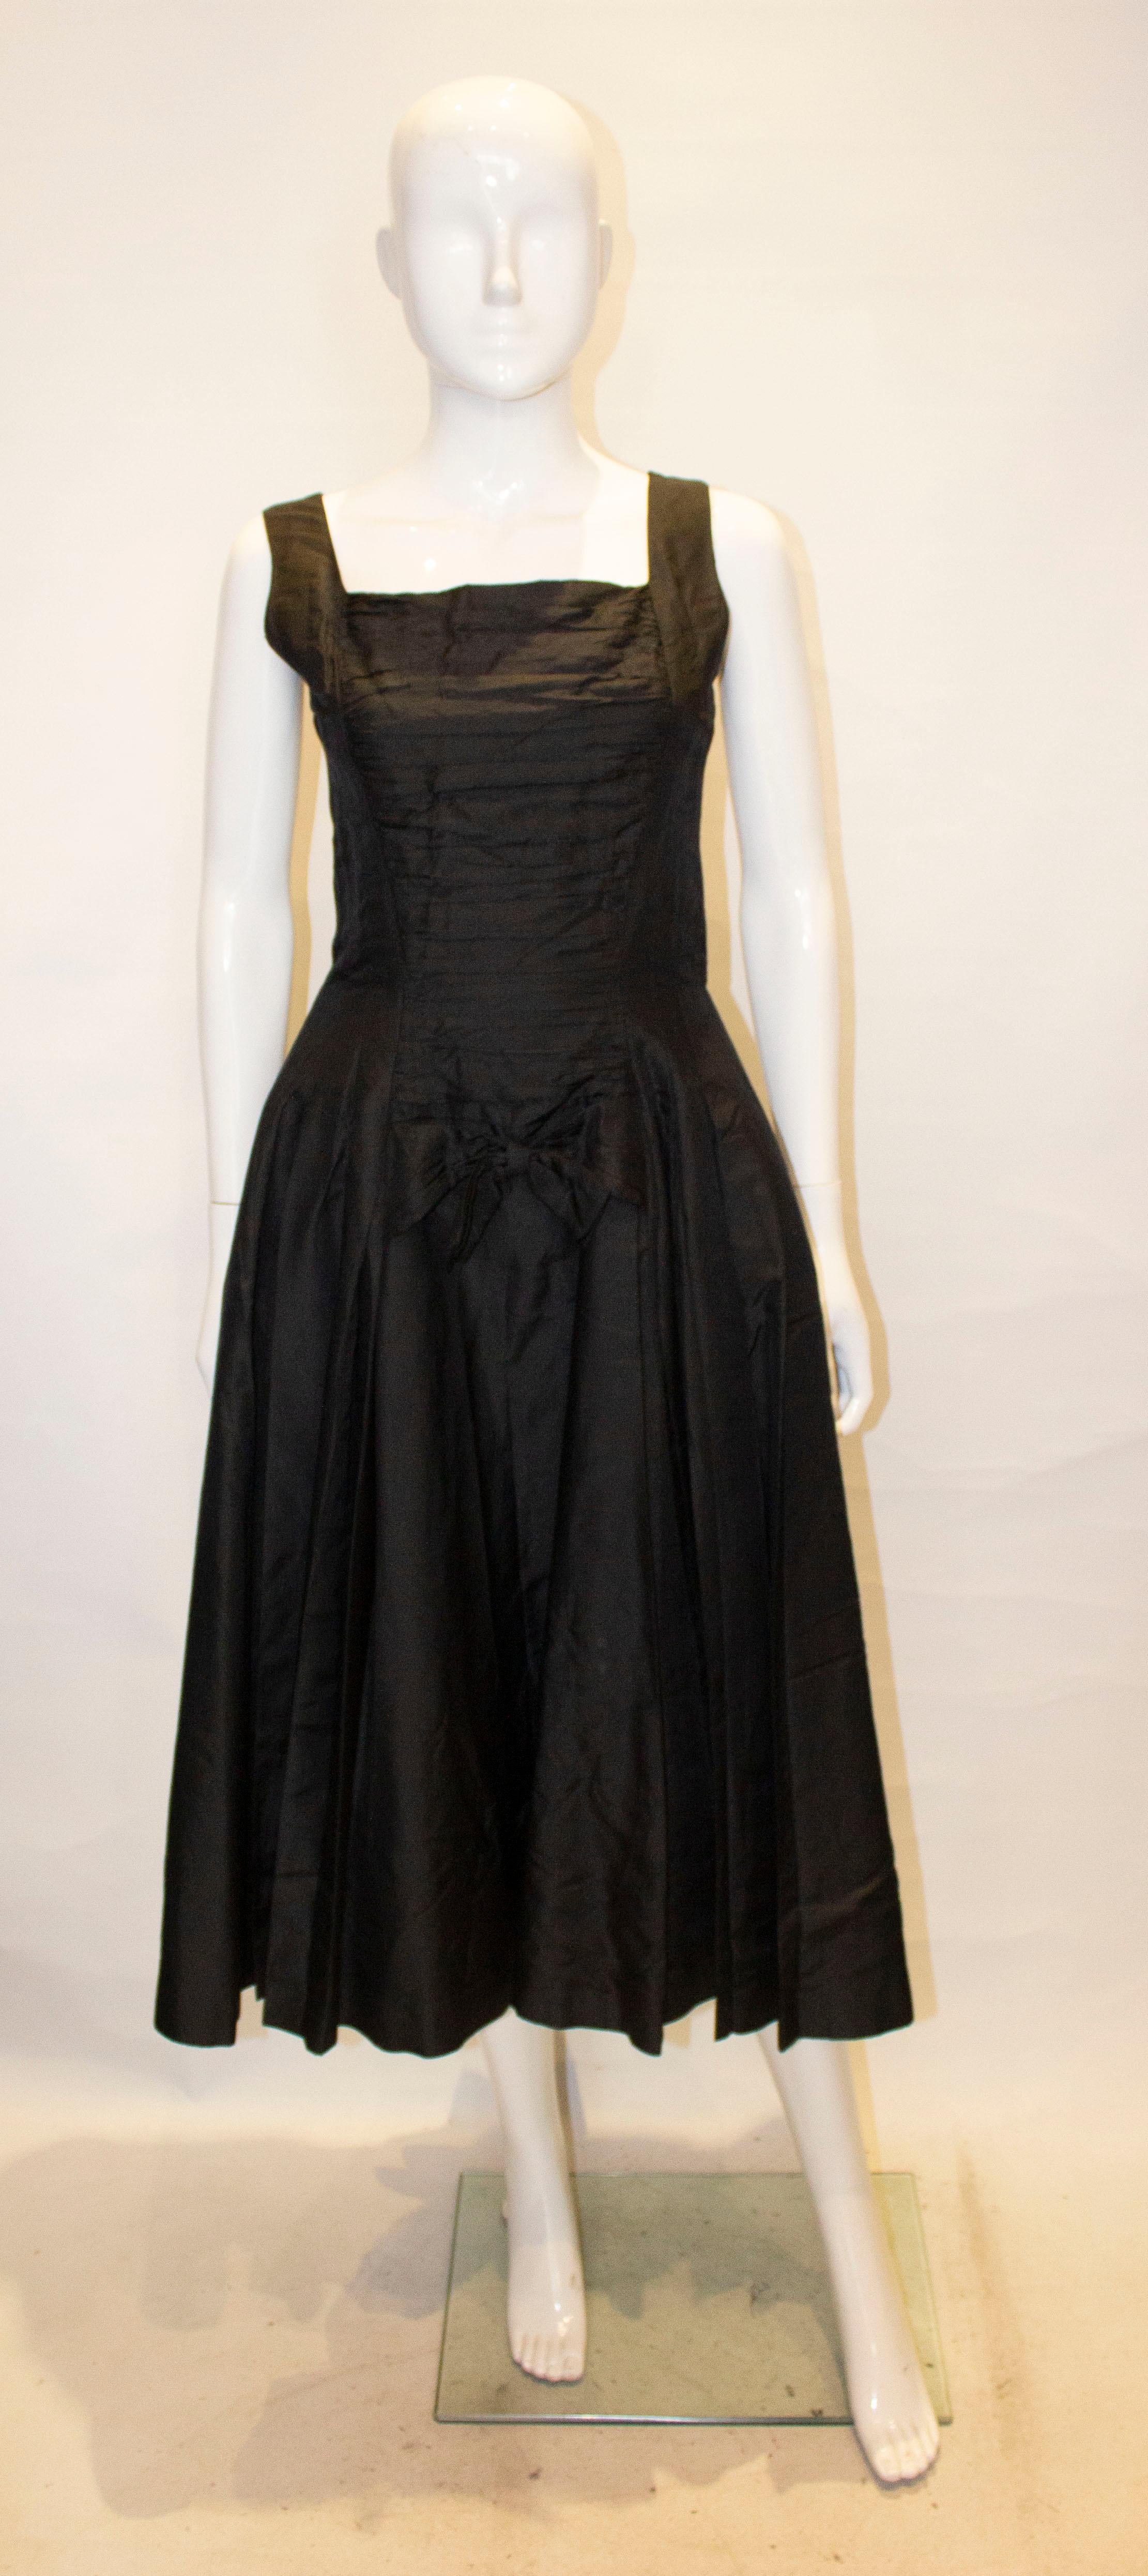 A pretty black cocktail dress by Suzy Perette.The dress has  a square neckline and low backline. It has gathering at the front with a bow detail, a belt at the back and a full underskirt.